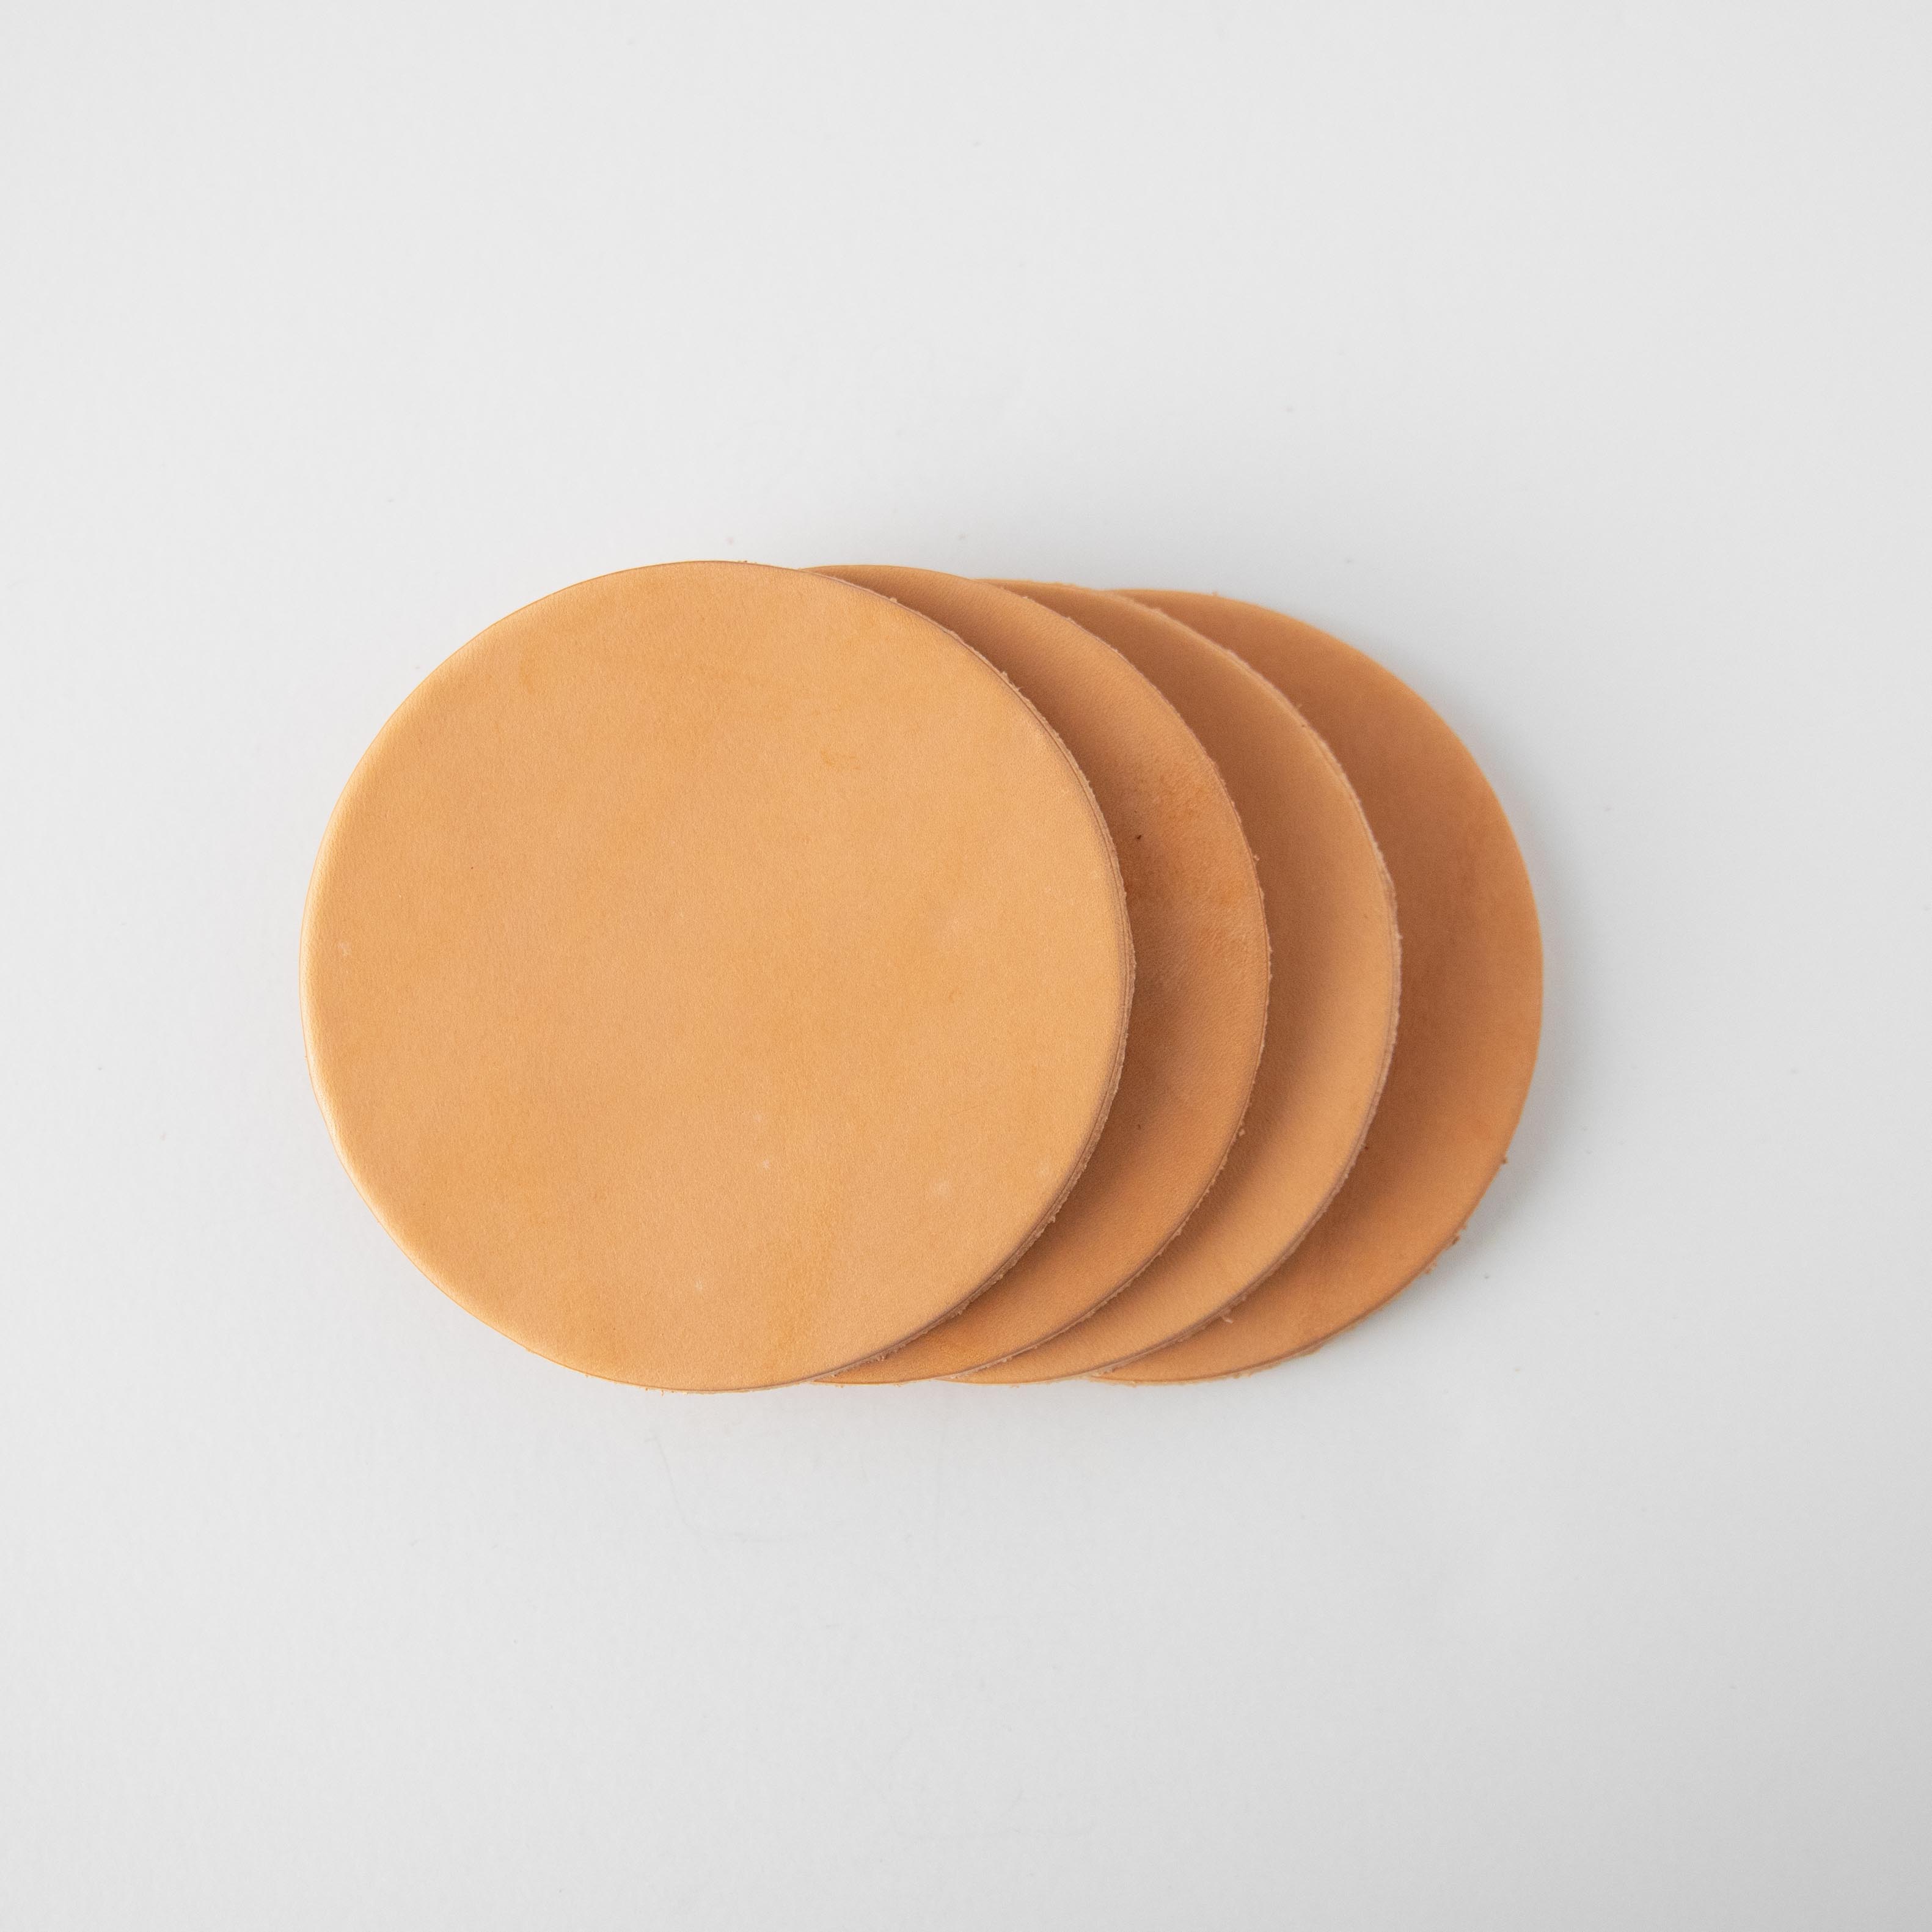 Vegetable Tanned Leather Coasters